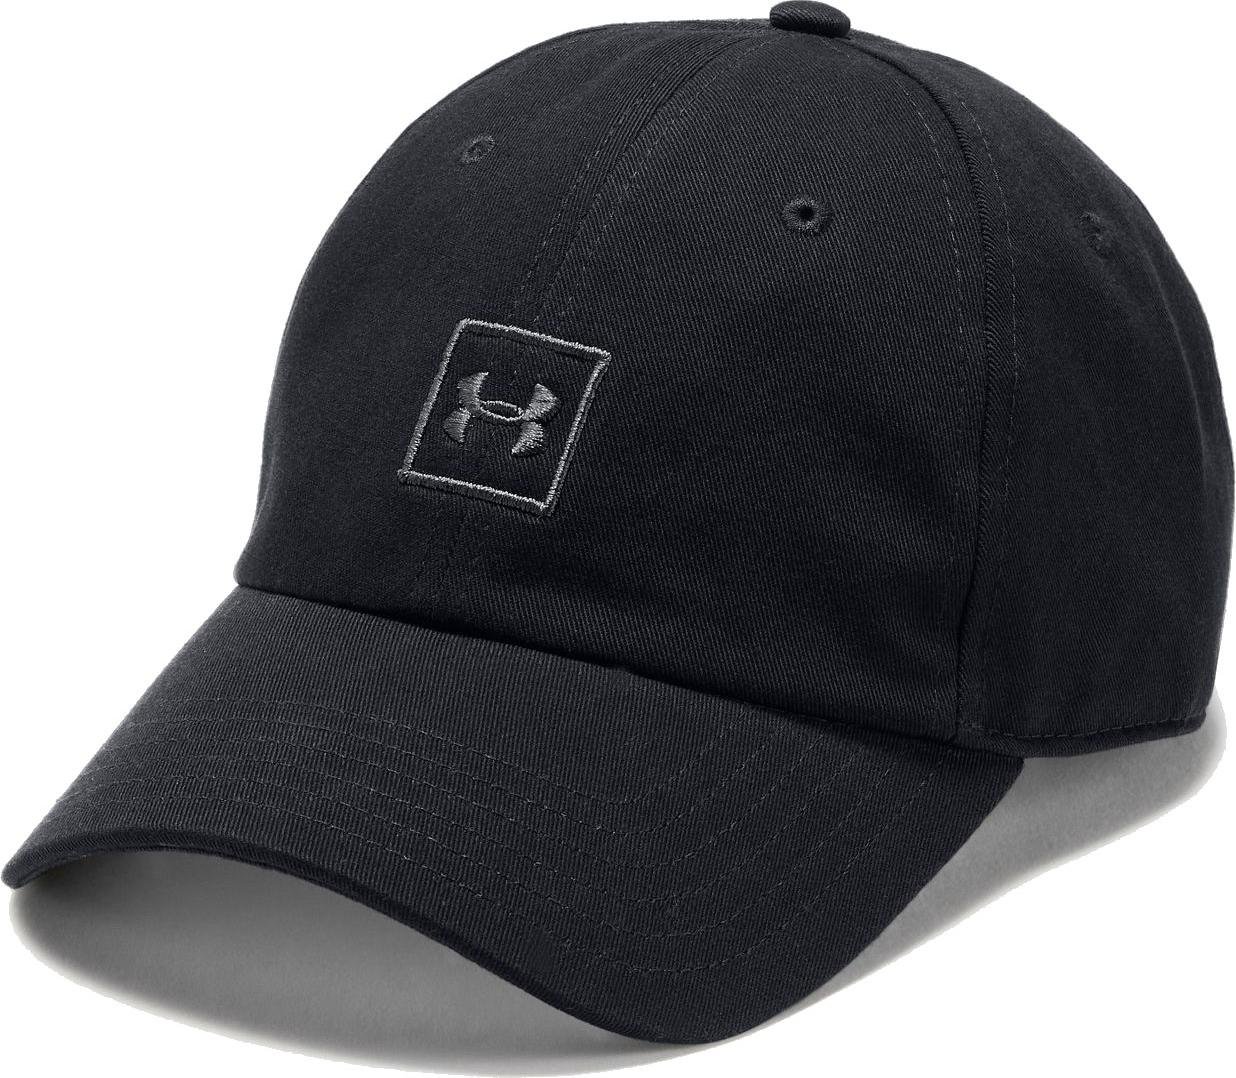 Šiltovka Under Armour Men s Washed Cotton Cap